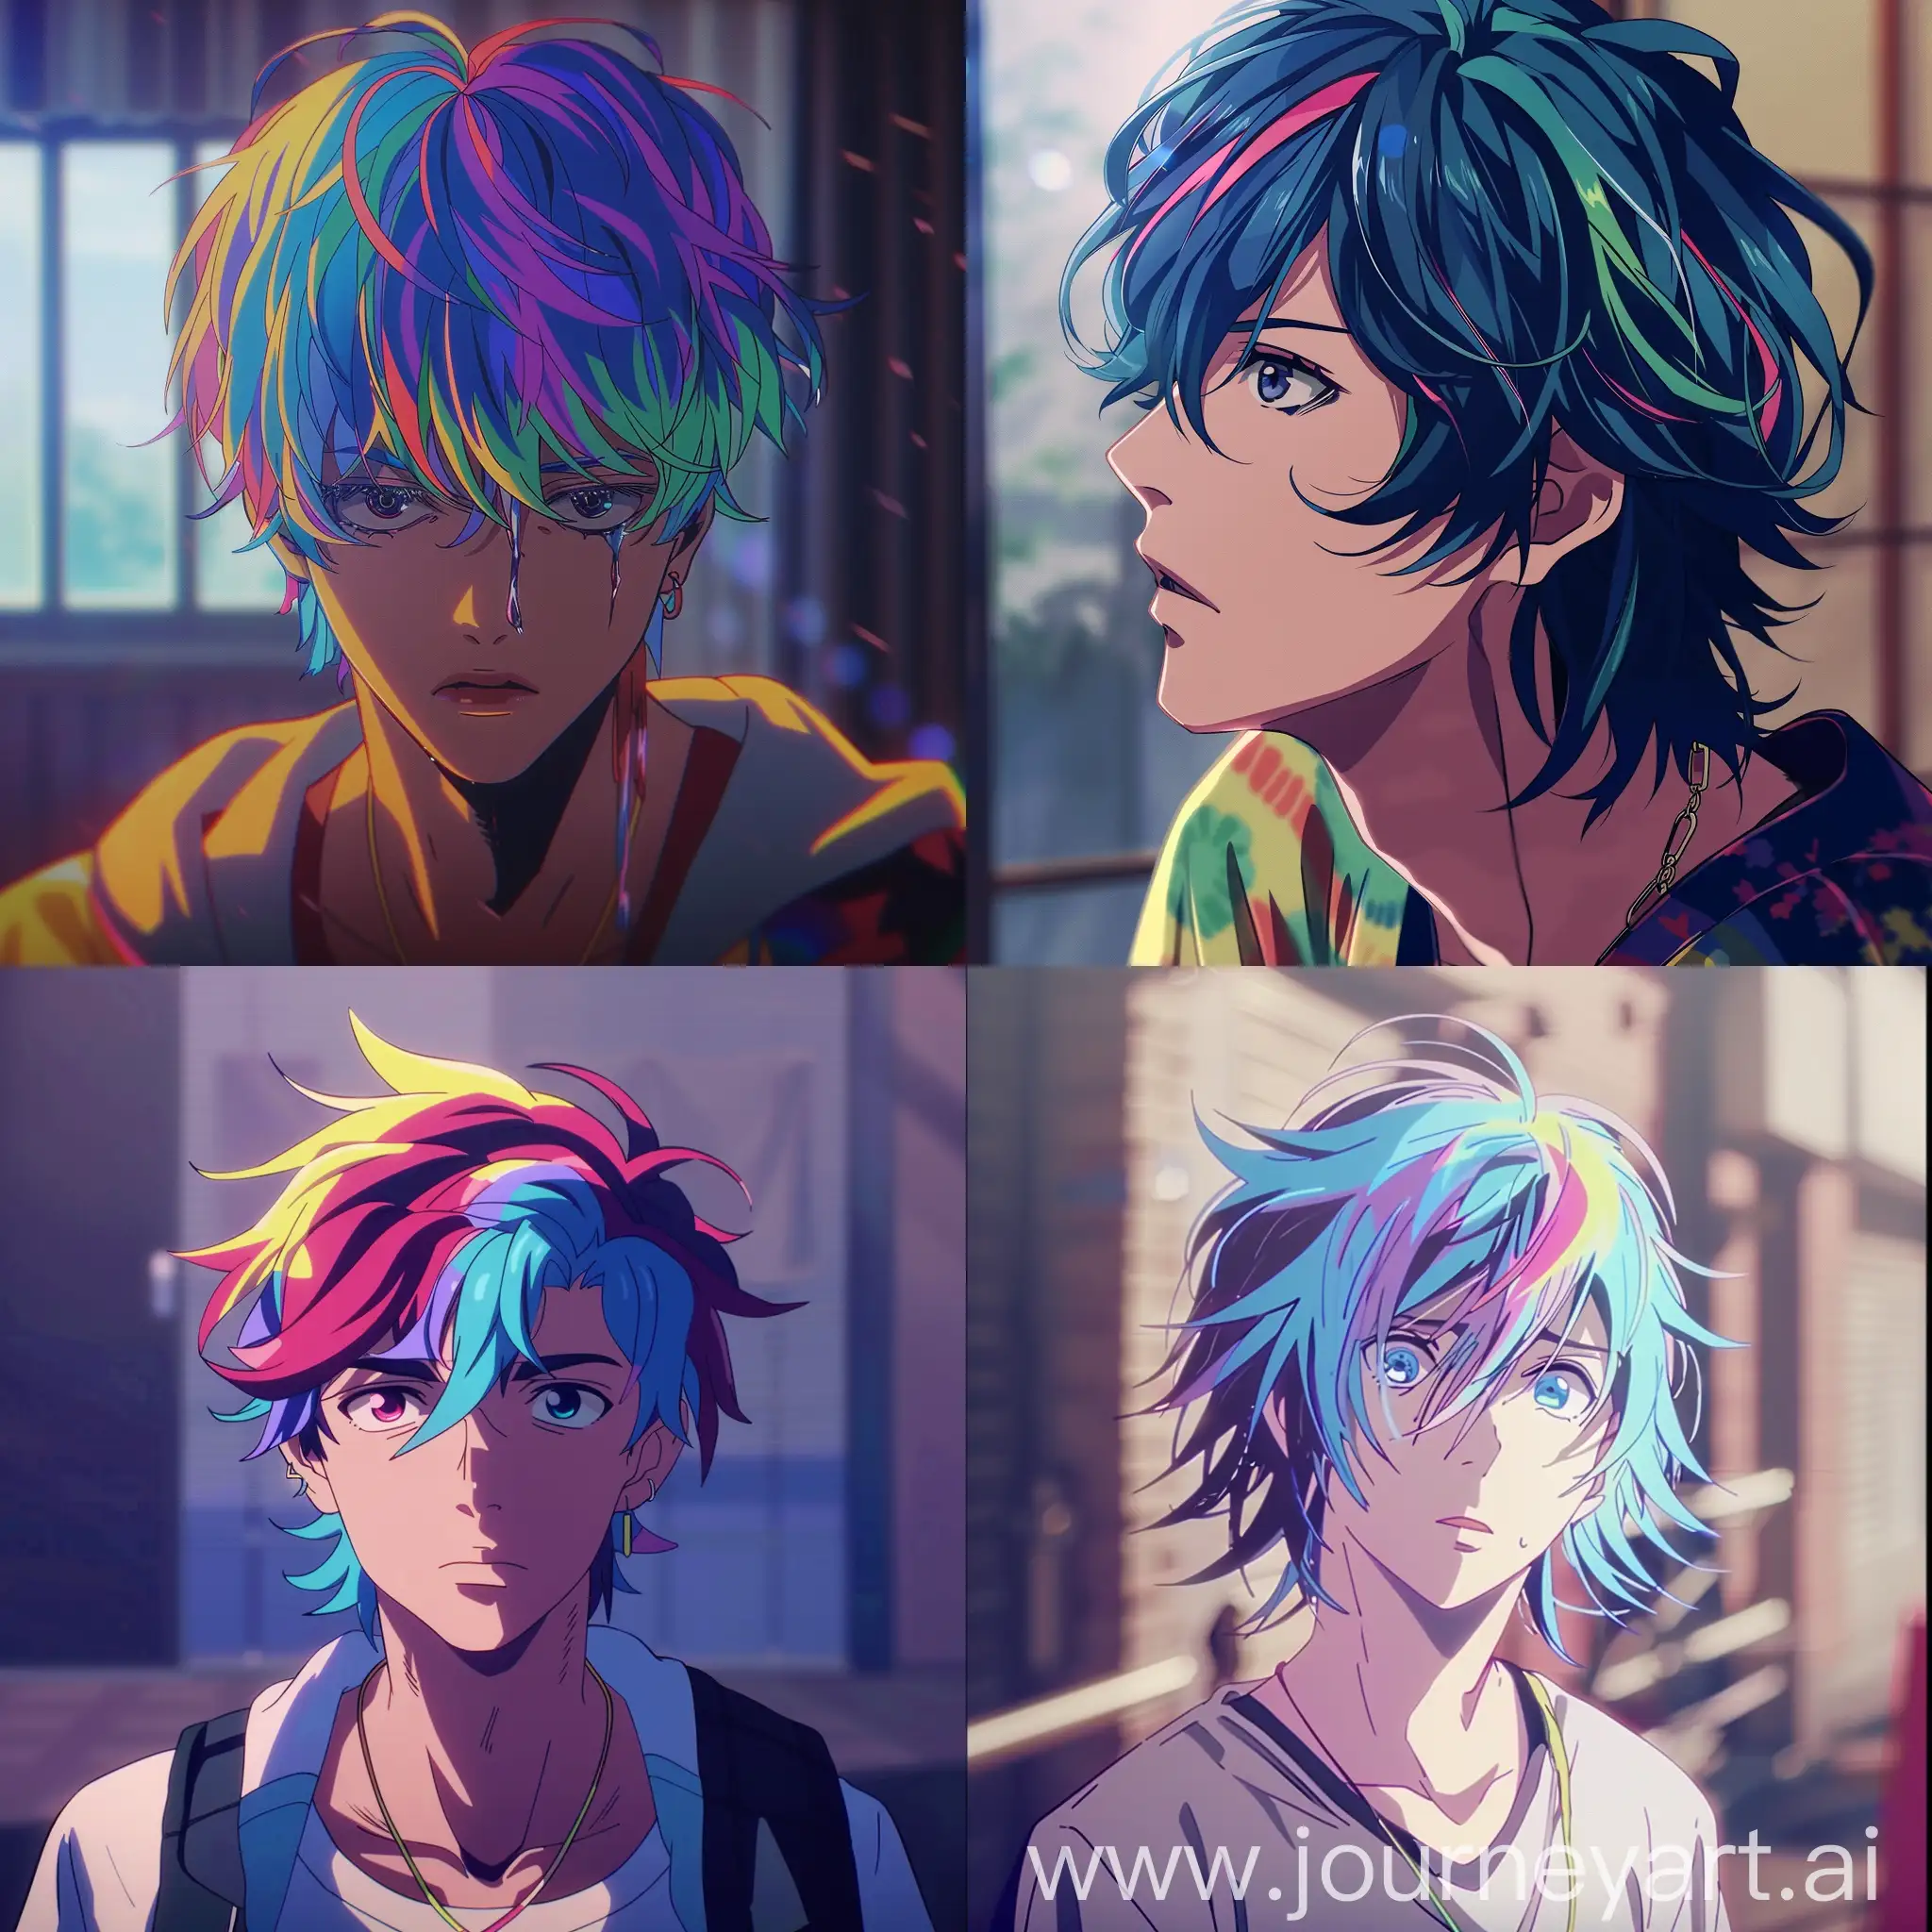 Fantasy-Anime-Scene-with-Gorgeous-Male-Character-and-Colorful-Hair